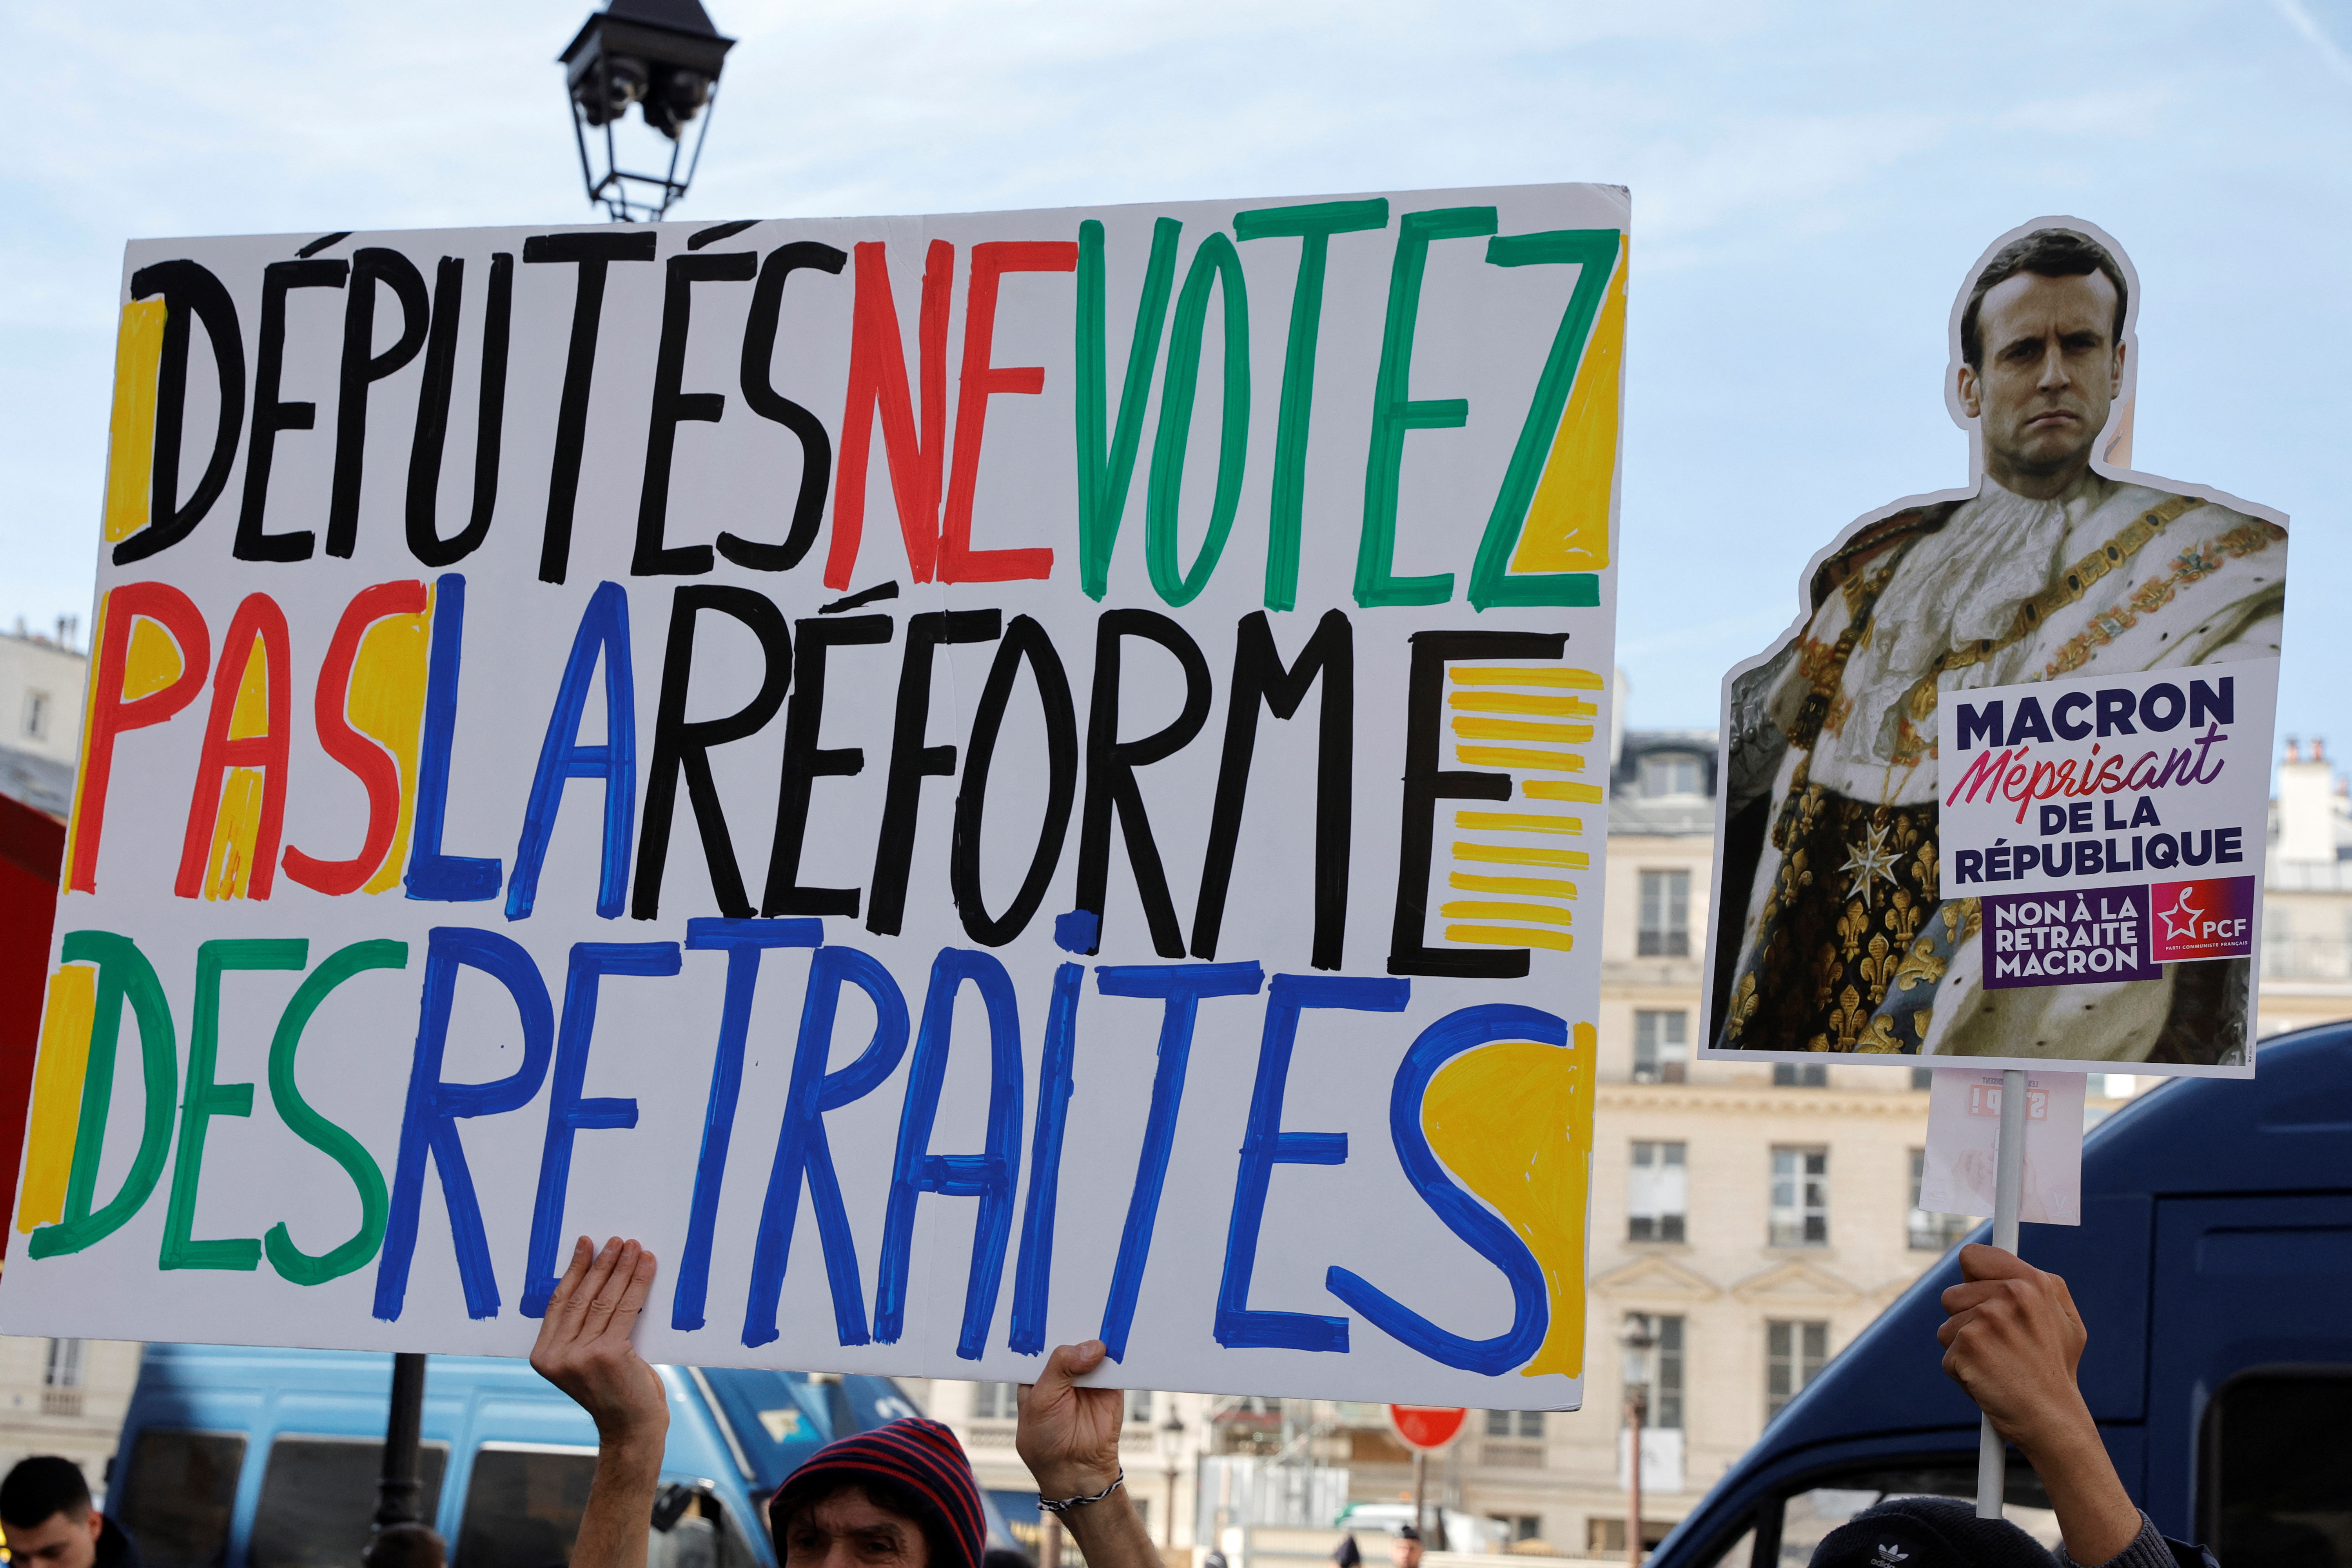 French parliament set to vote on pensions reform bill in Paris